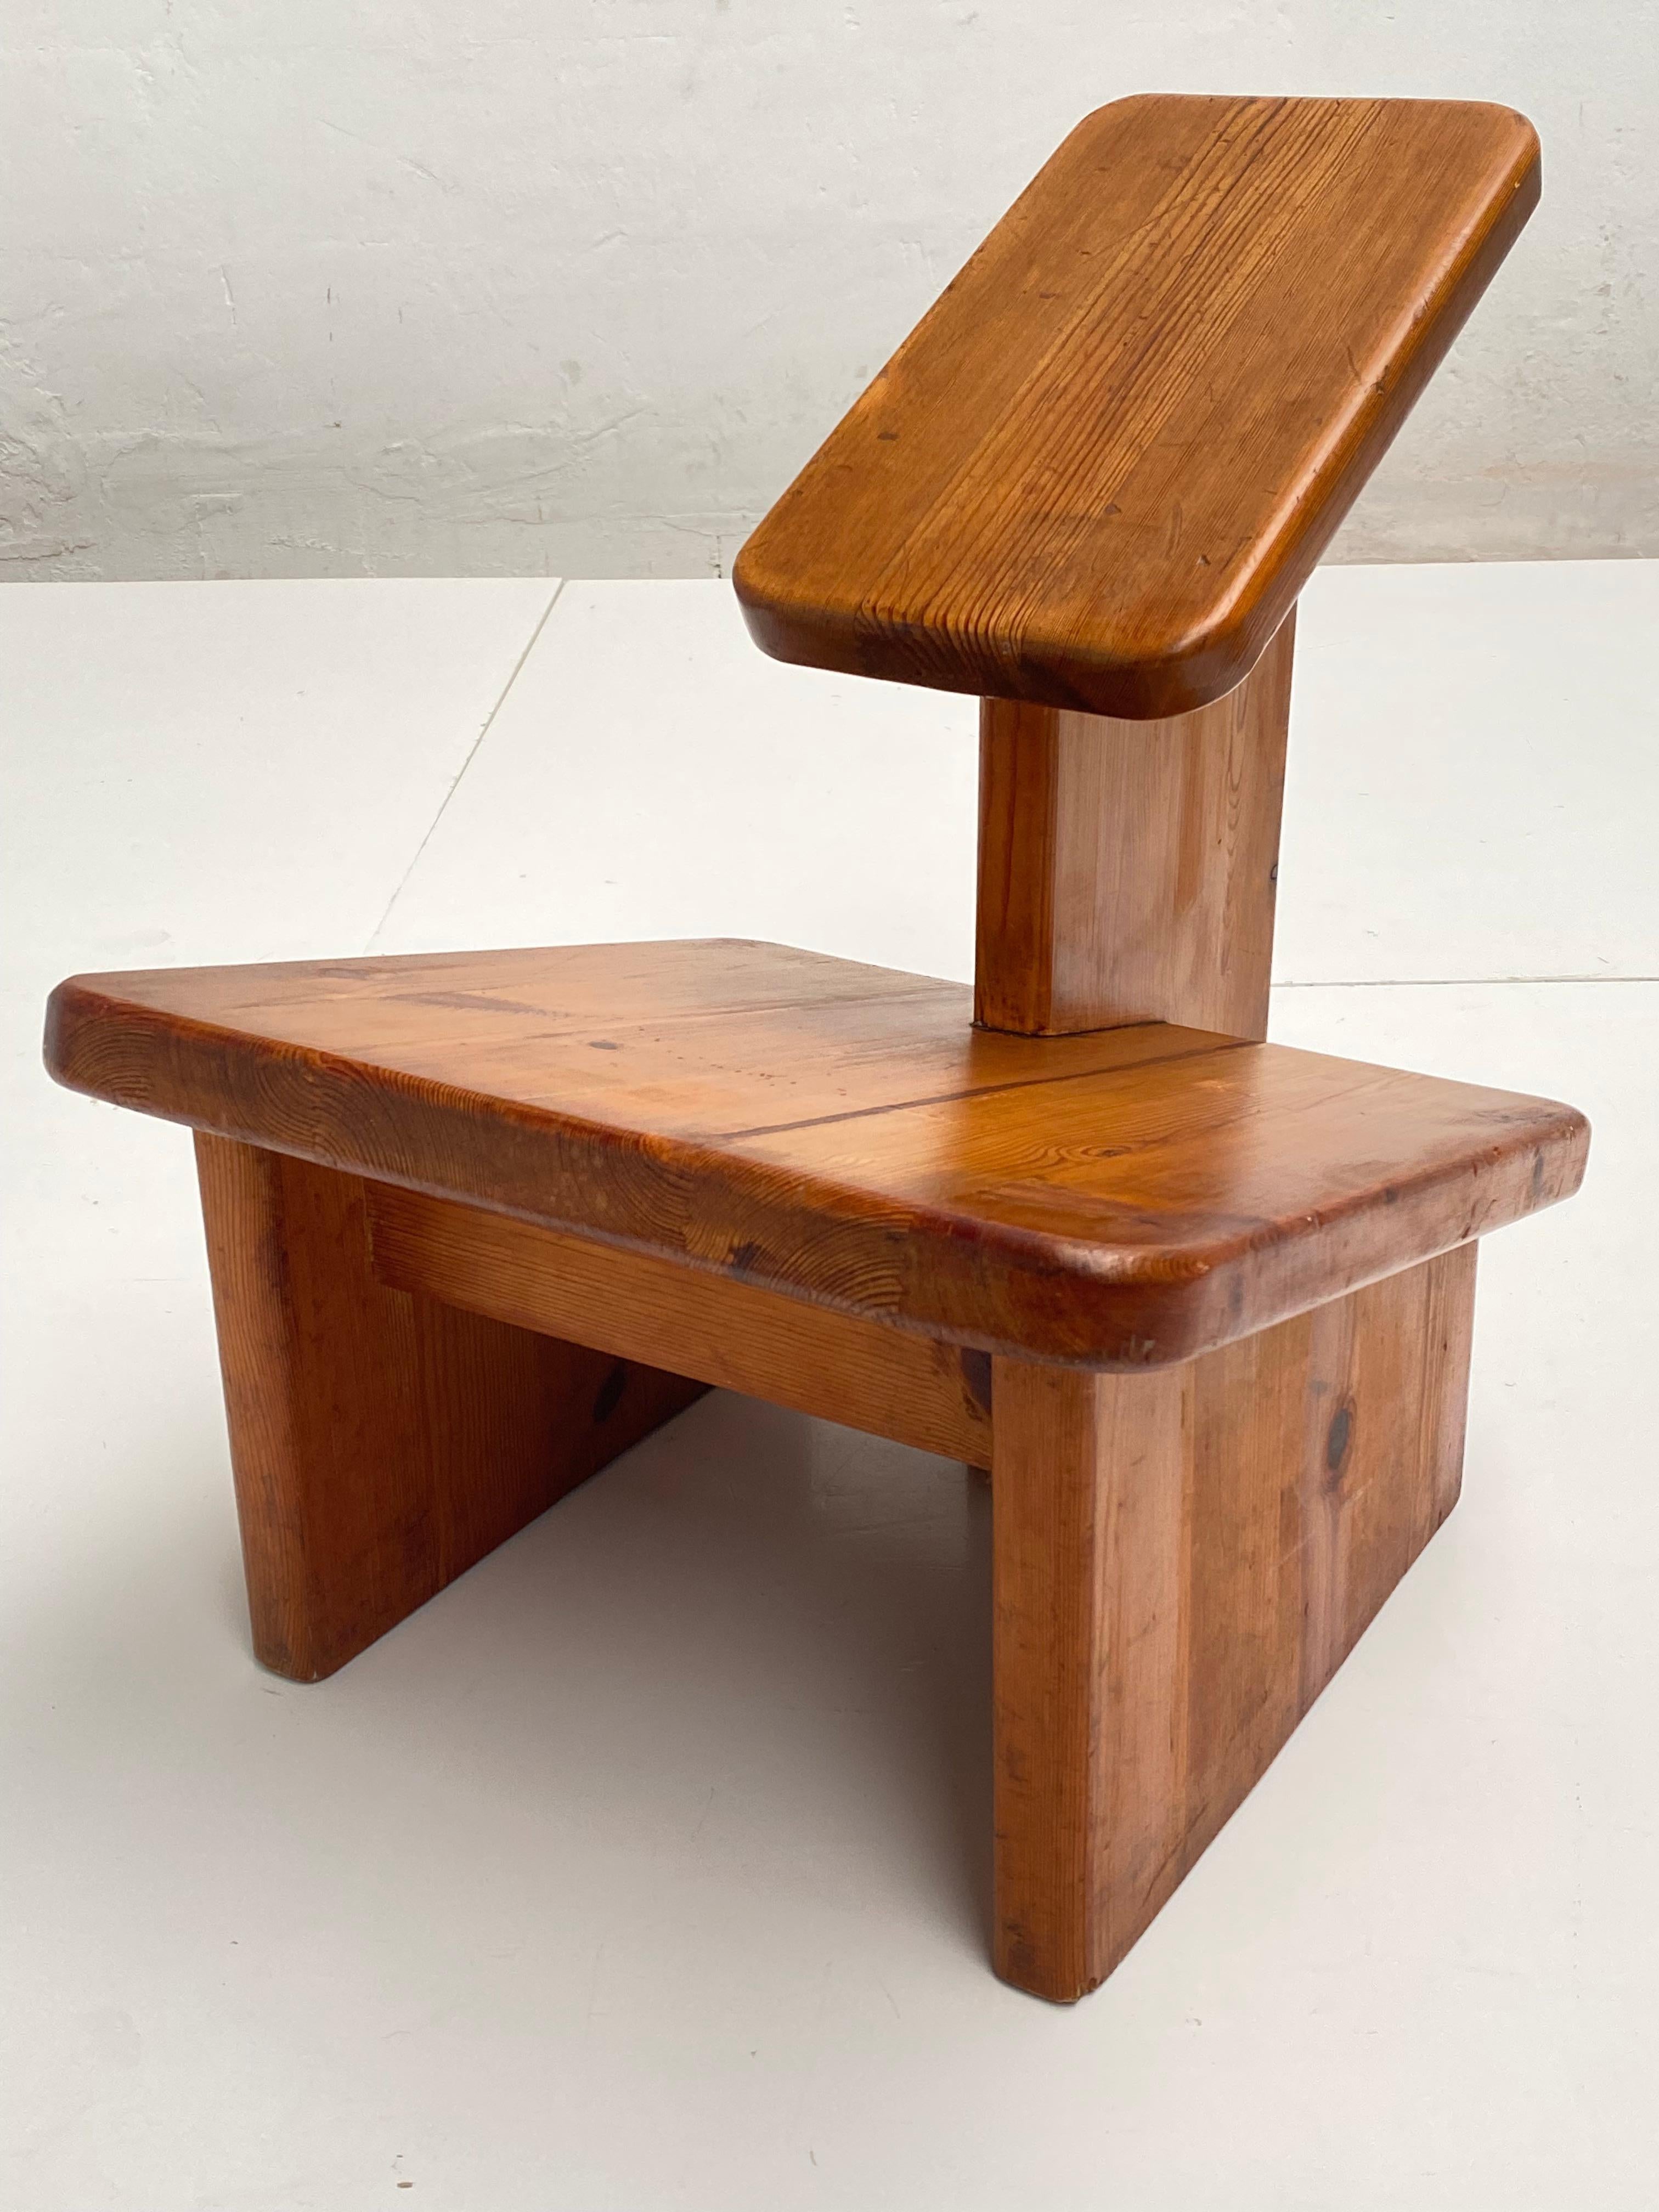 Vintage 1970's Scandinavian Ergonomic Seating Object made out of solid pinewood

Very well crafted and solid piece with great aged patina Pine wood

